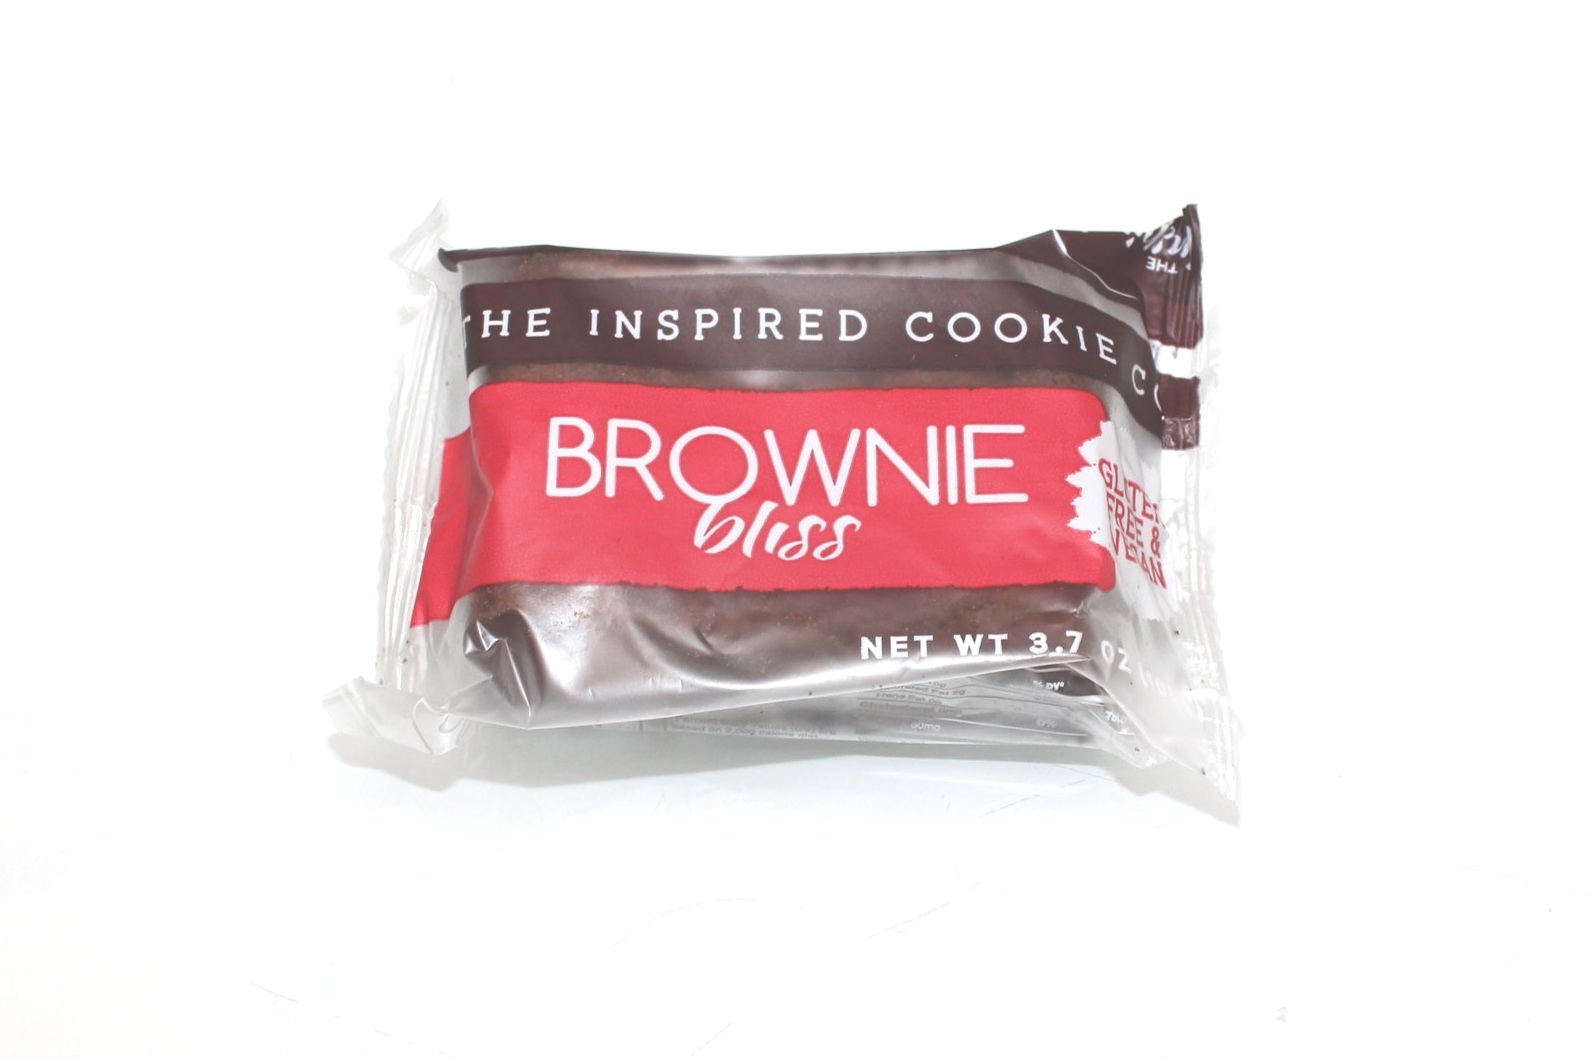 Inspired Brownie